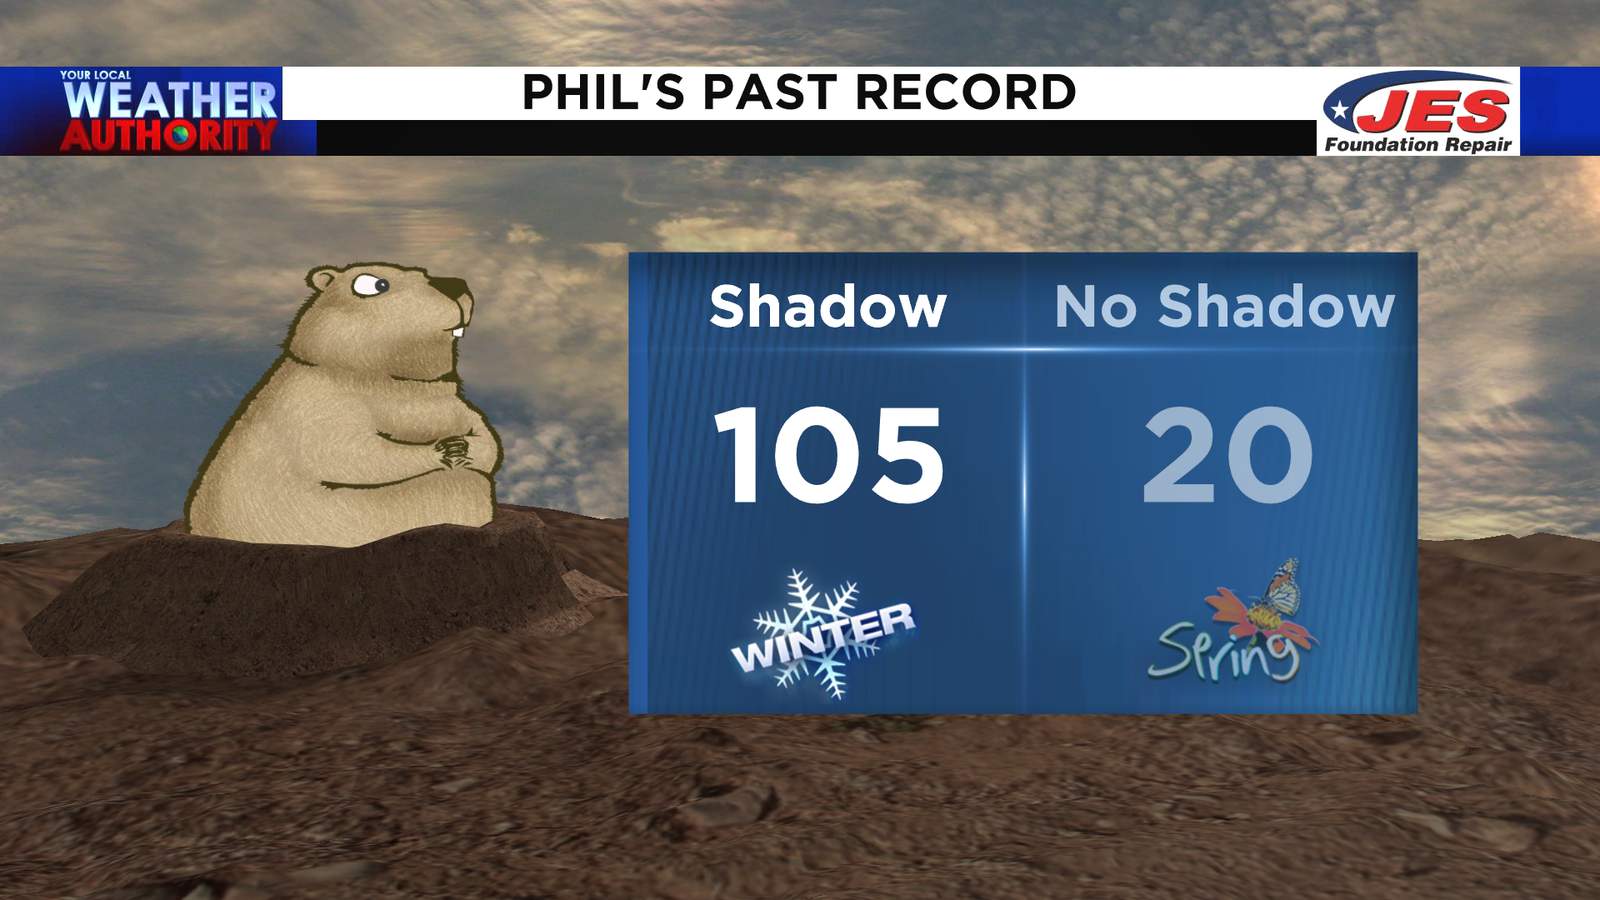 Despite clouds and snow, Phil sees shadow; predicts six more weeks of winter